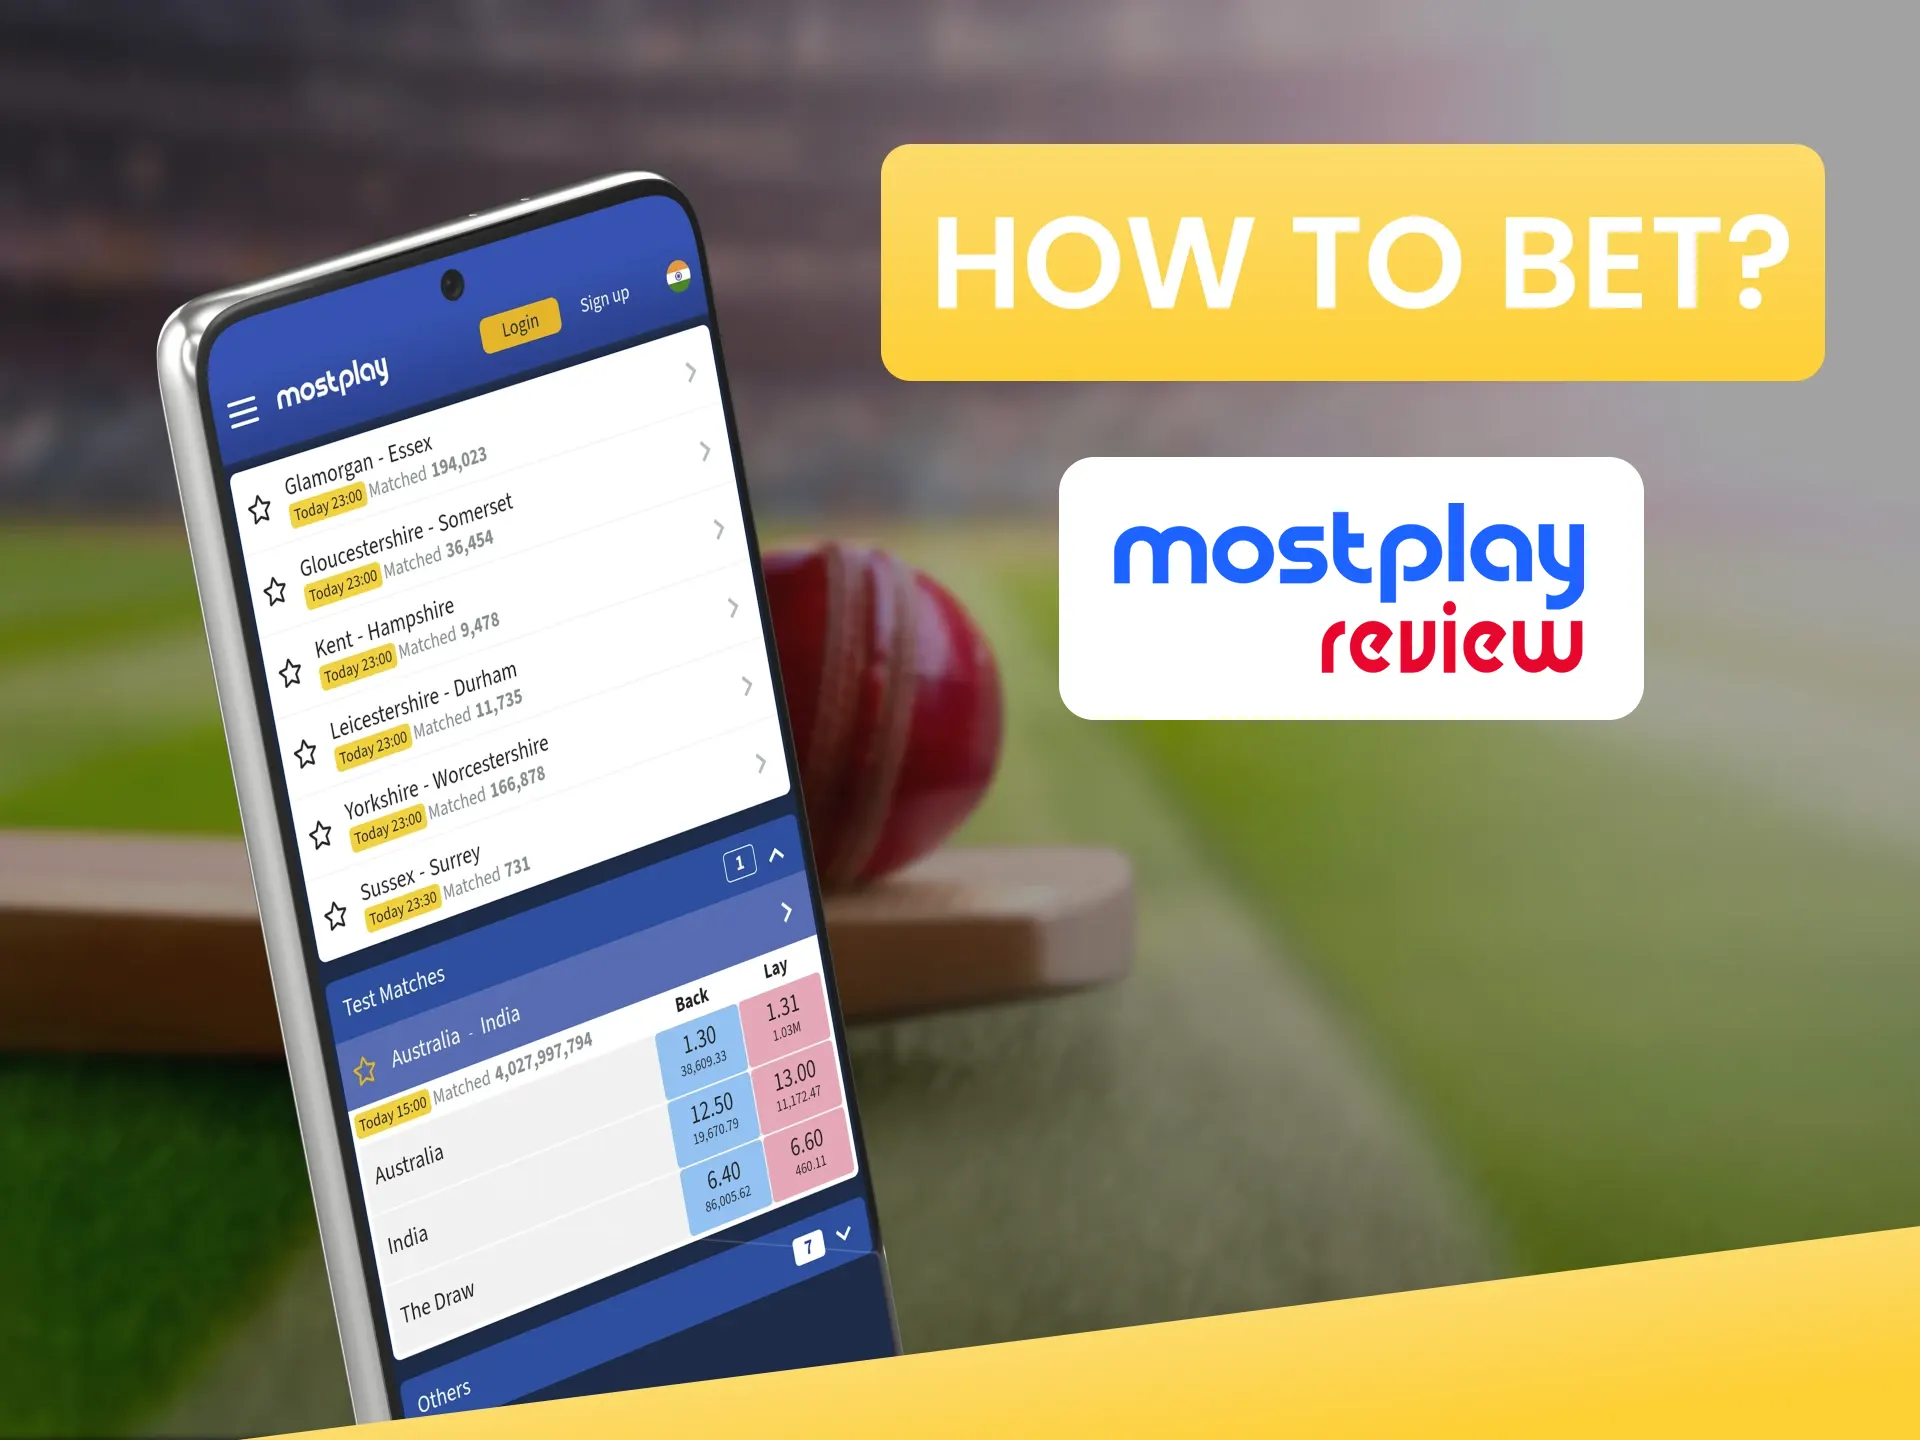 We will tell you how to bet on Cricket on Mostplay.